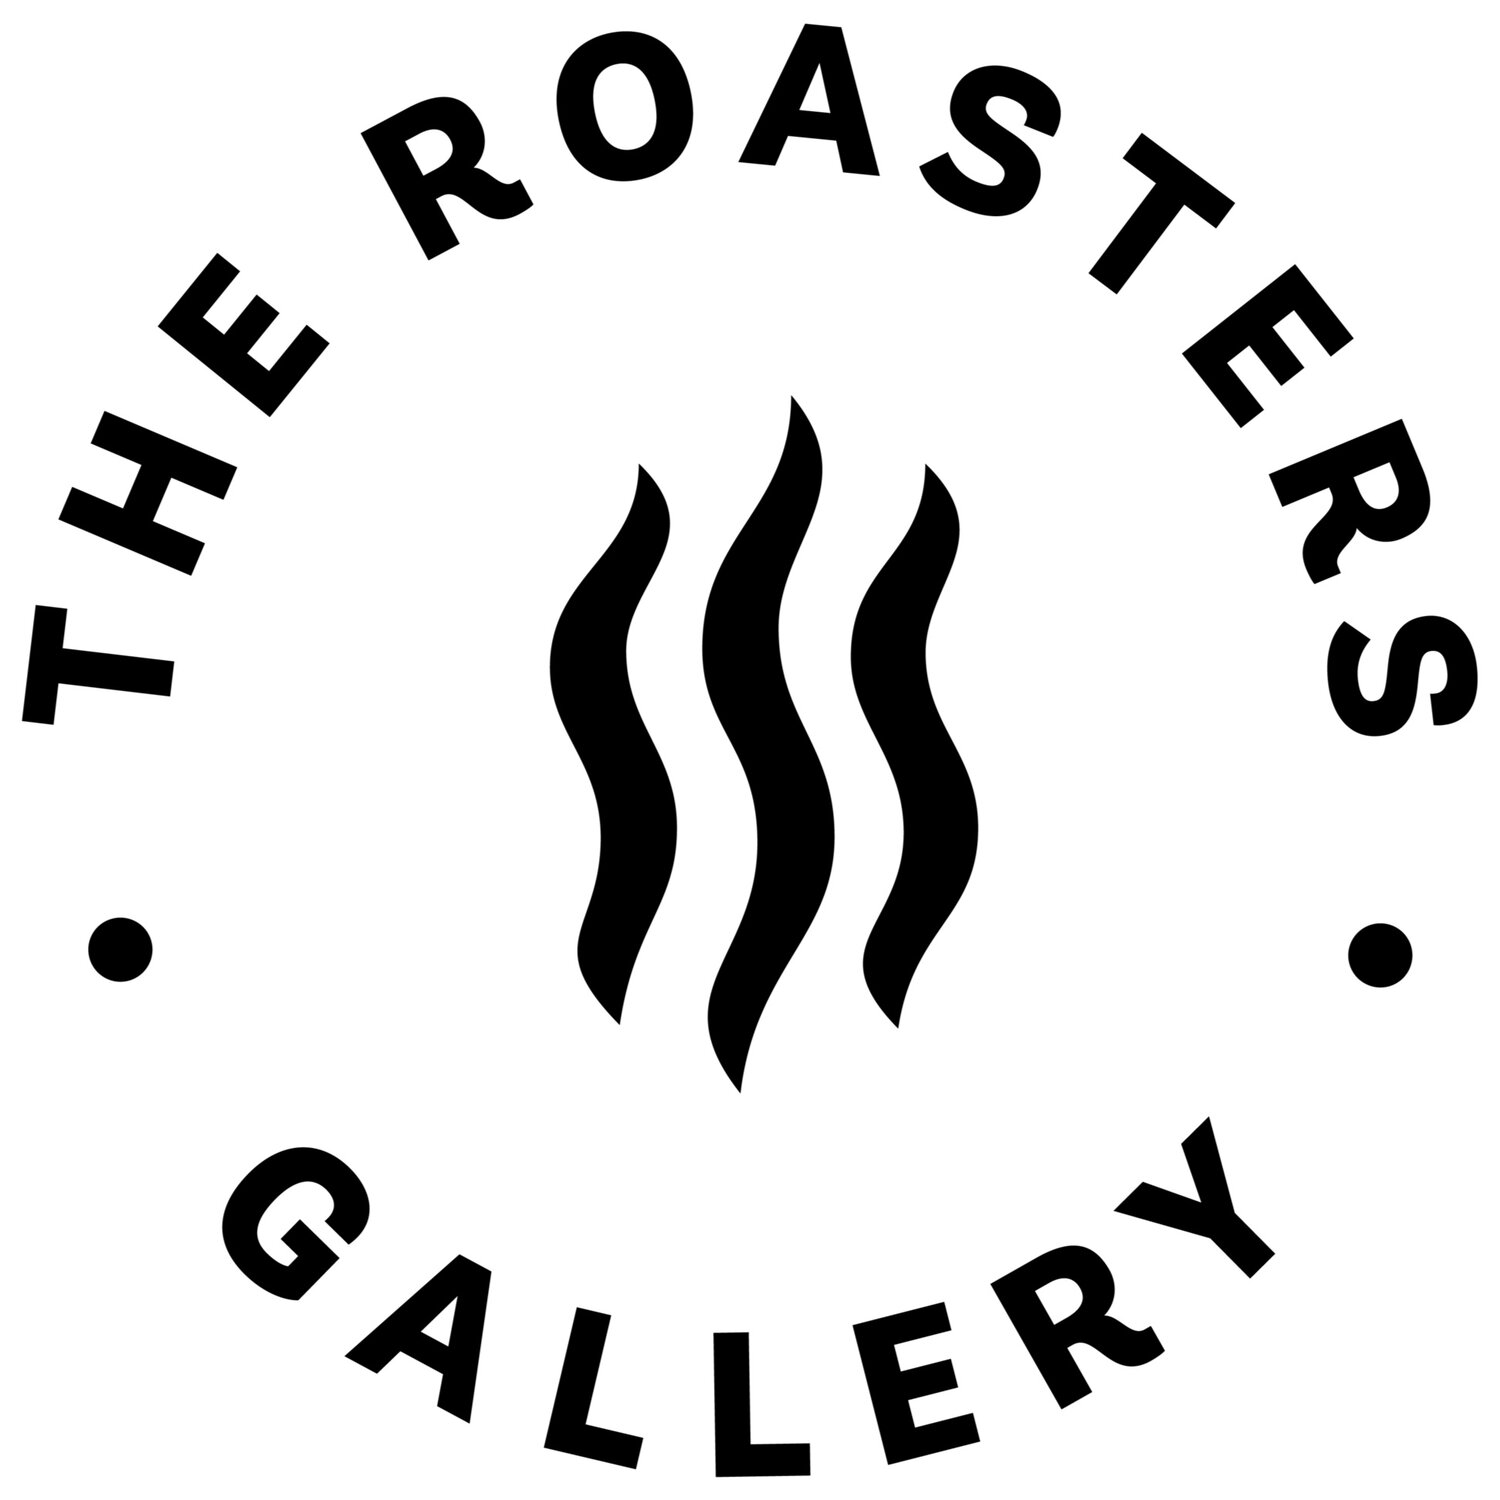 The Roasters Gallery